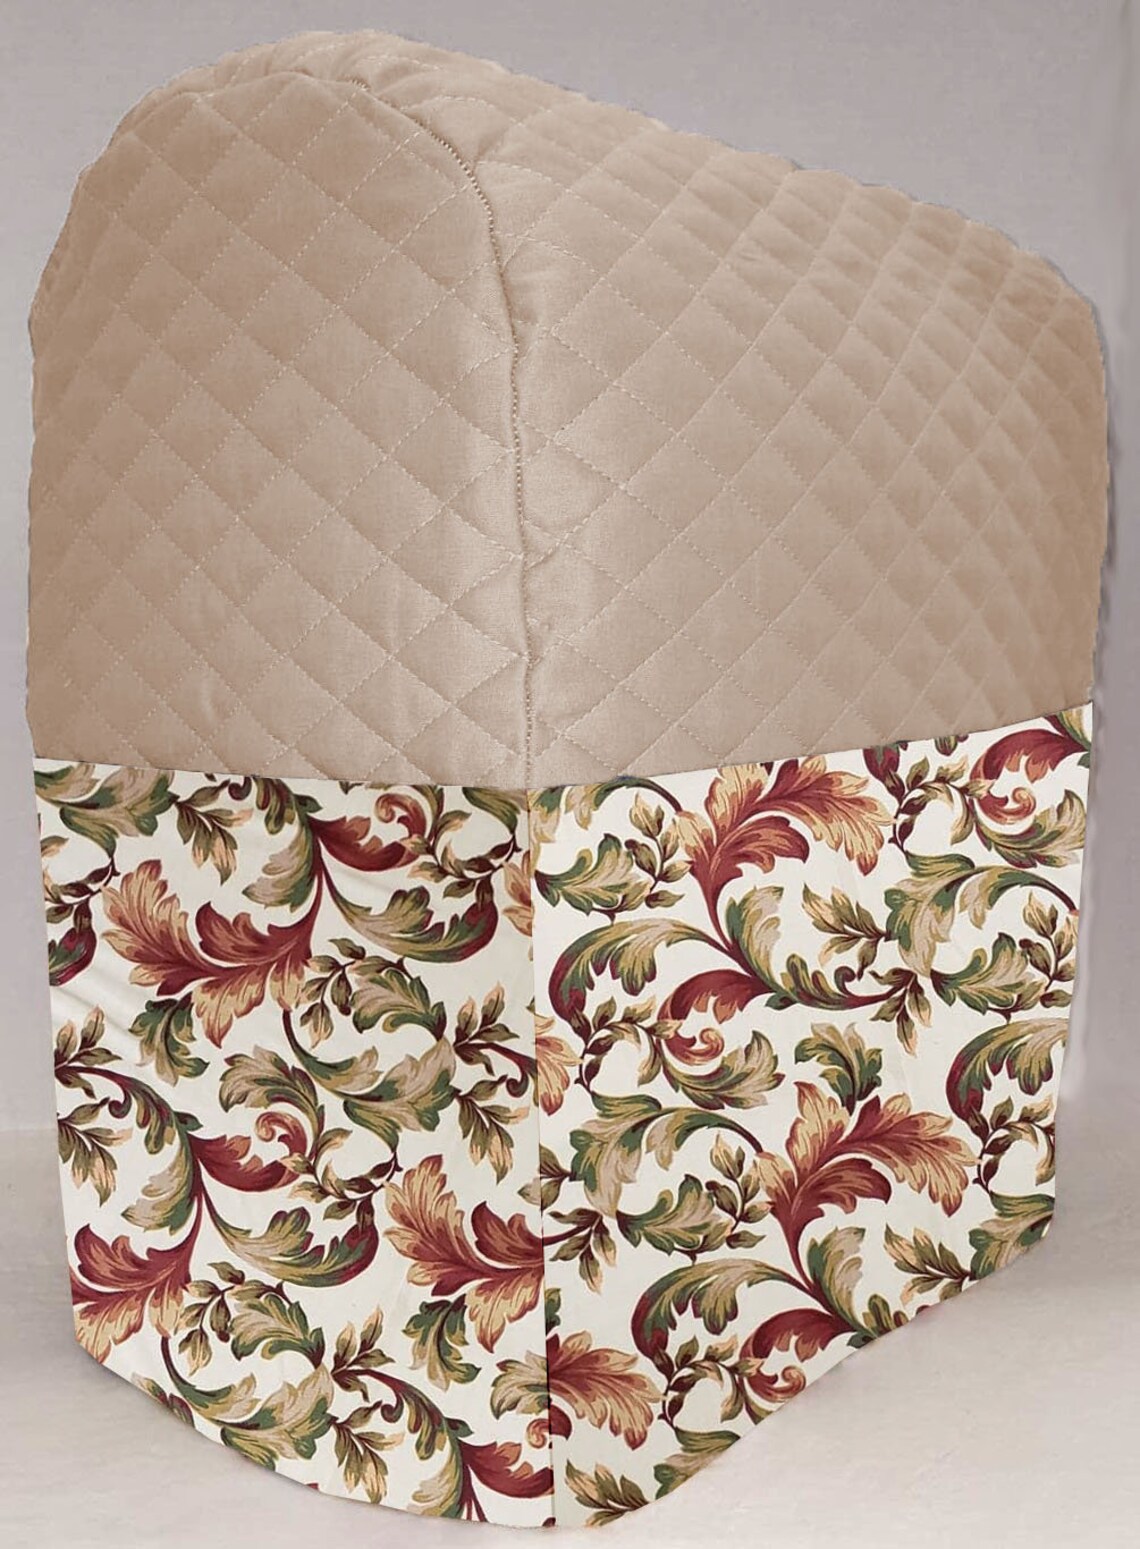 Quilted Autumn Fall Floral Leaves Cover Compatible with Kitchenaid Stand Mixer by Penny's Needful Things (Tan, 4.5qt / 5qt Tilt Head) - image 1 of 2